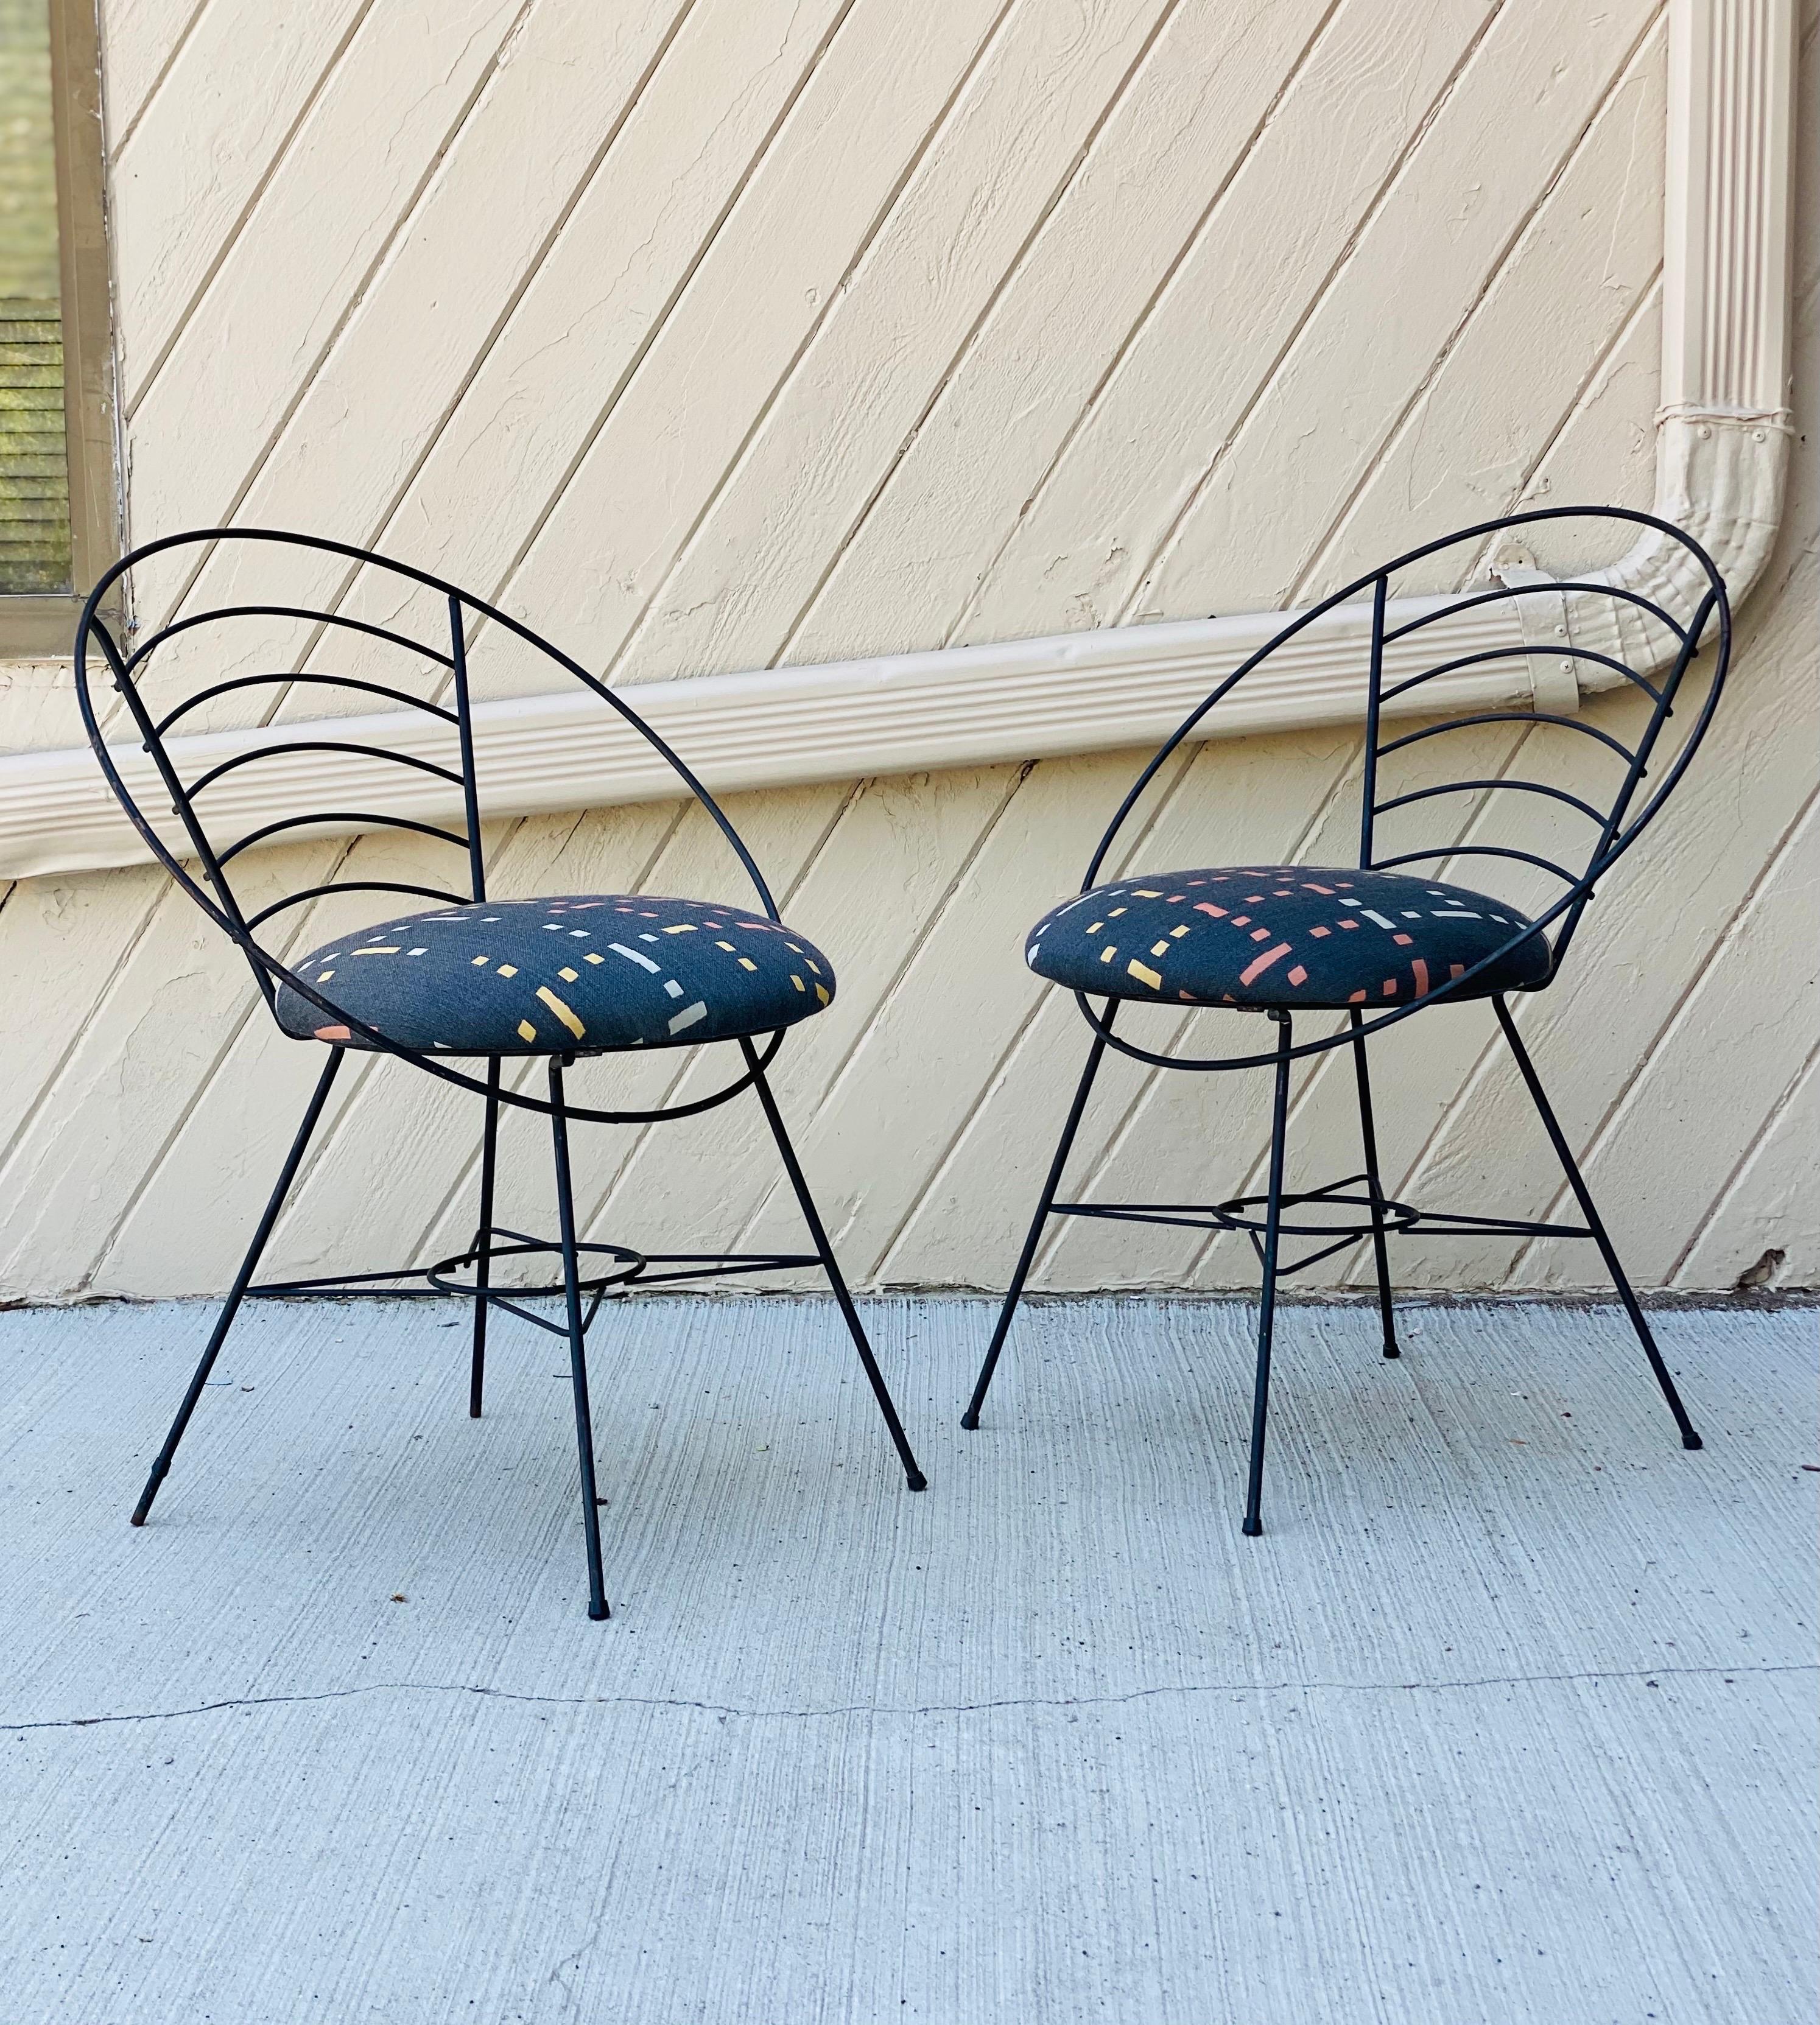 Late 20th Century 1970s Wrought Black Iron Atomic Hoop Chairs, a Pair For Sale